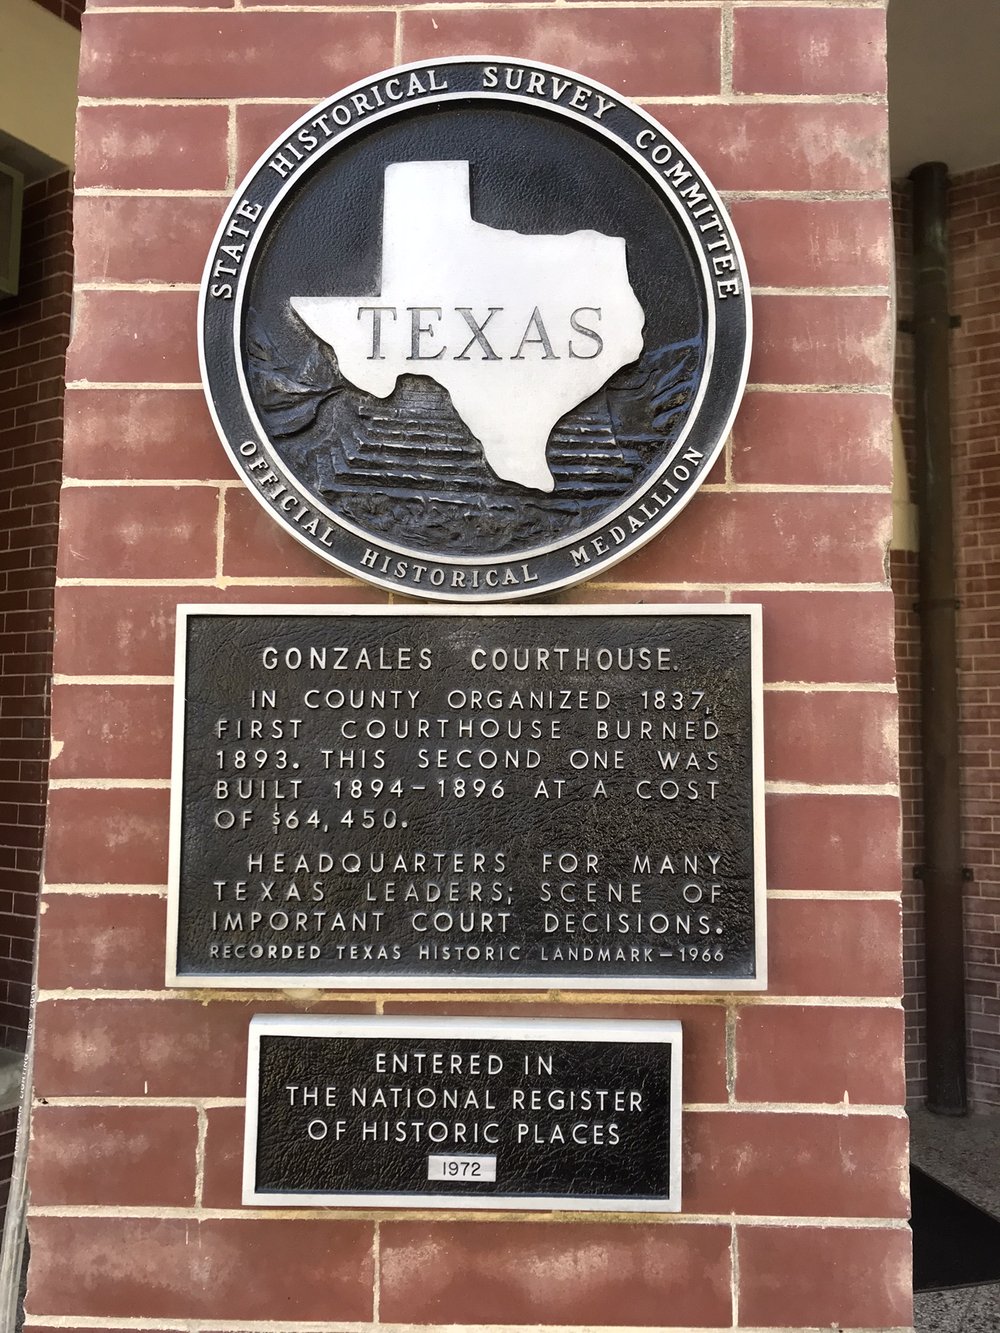 Gonzales Courthouse